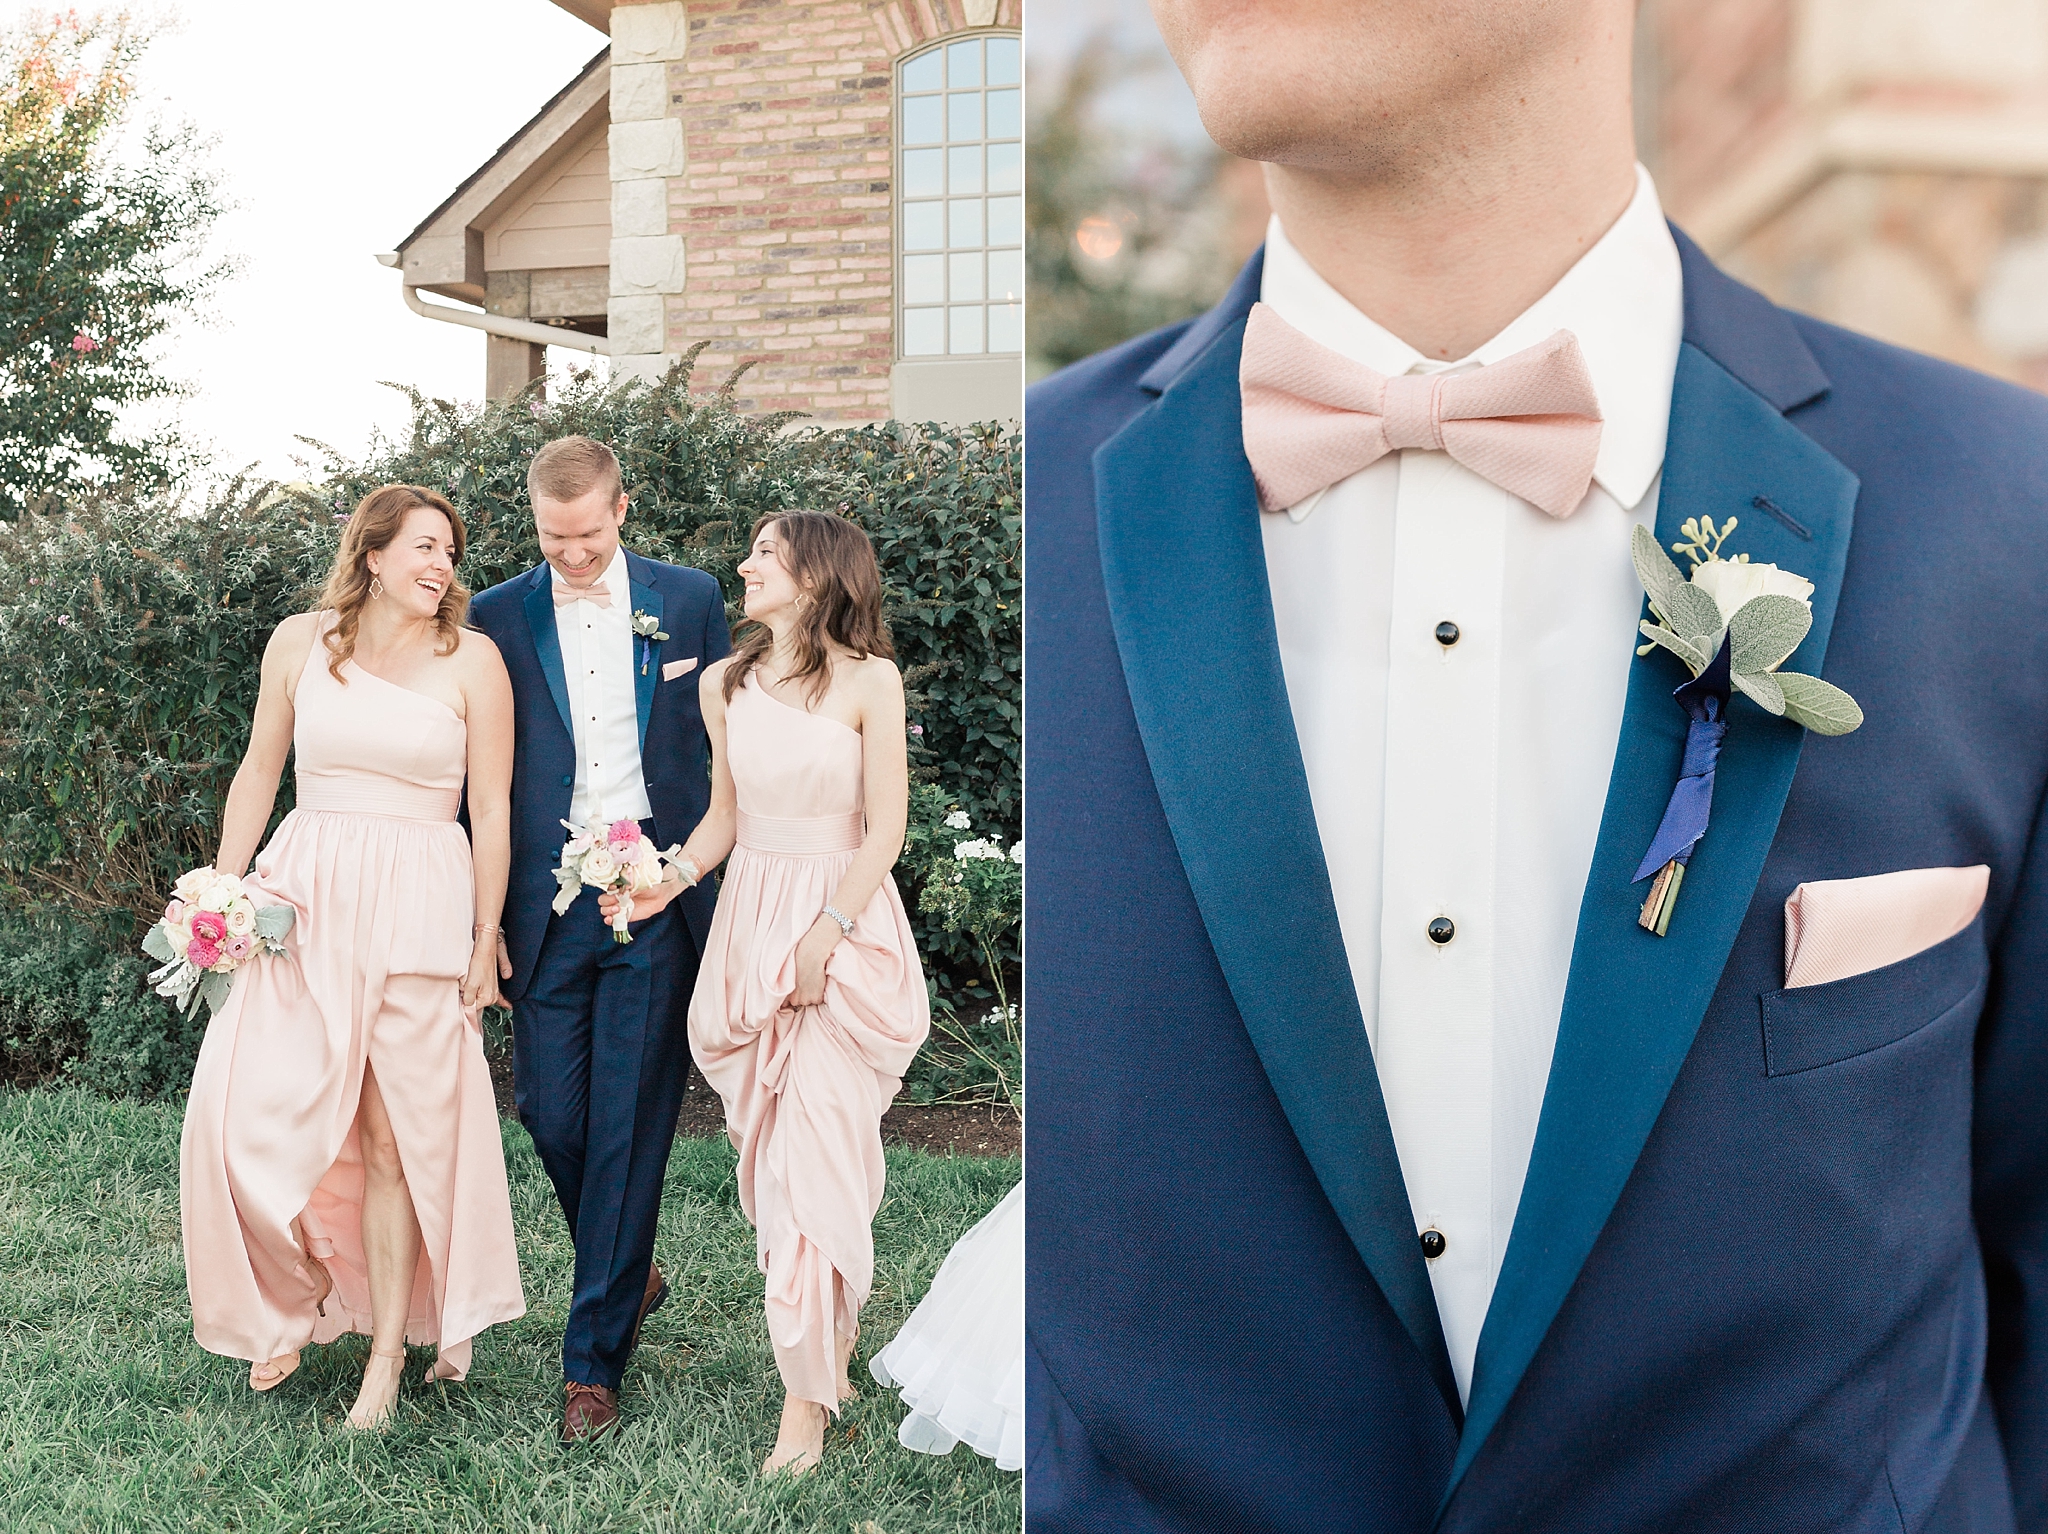 A classic Kate Spade themed wedding at Early Mountain Vineyards in Madison, VA.